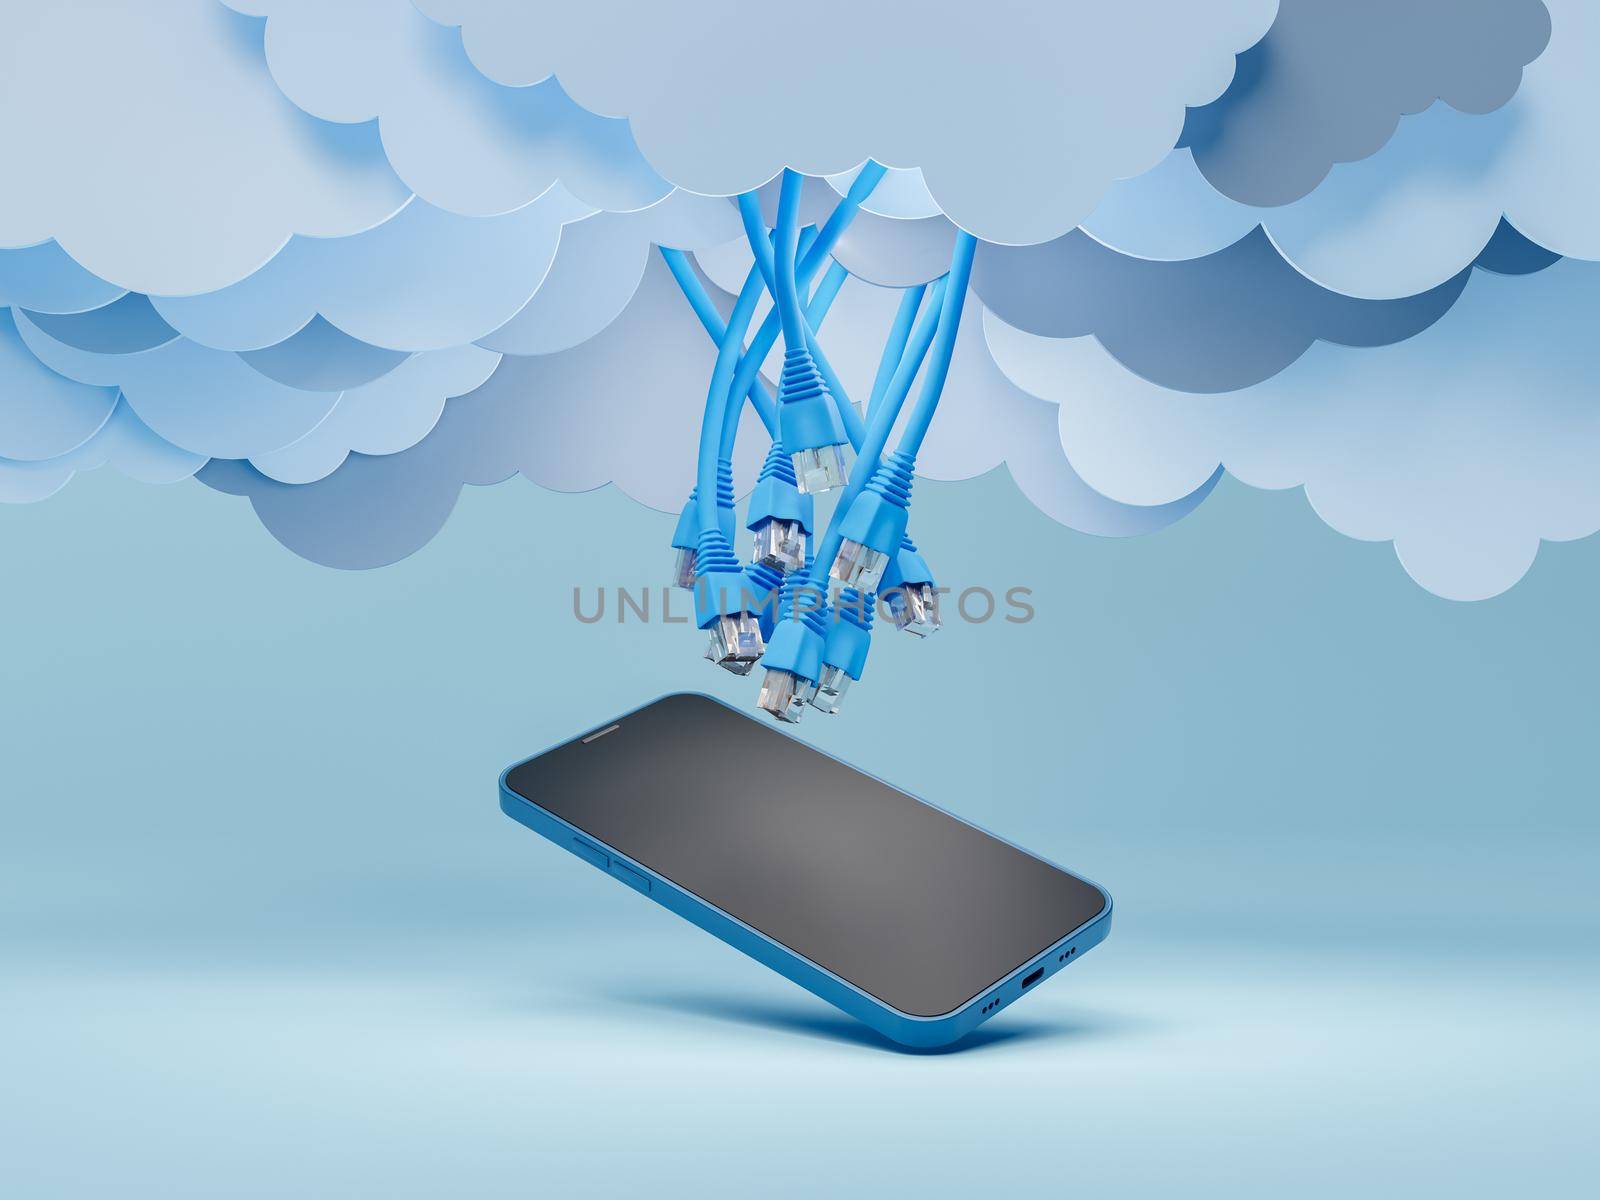 mobile phone with ethernet cables falling from flat clouds. cloud storage concept, technology, security, online and internet. 3d rendering